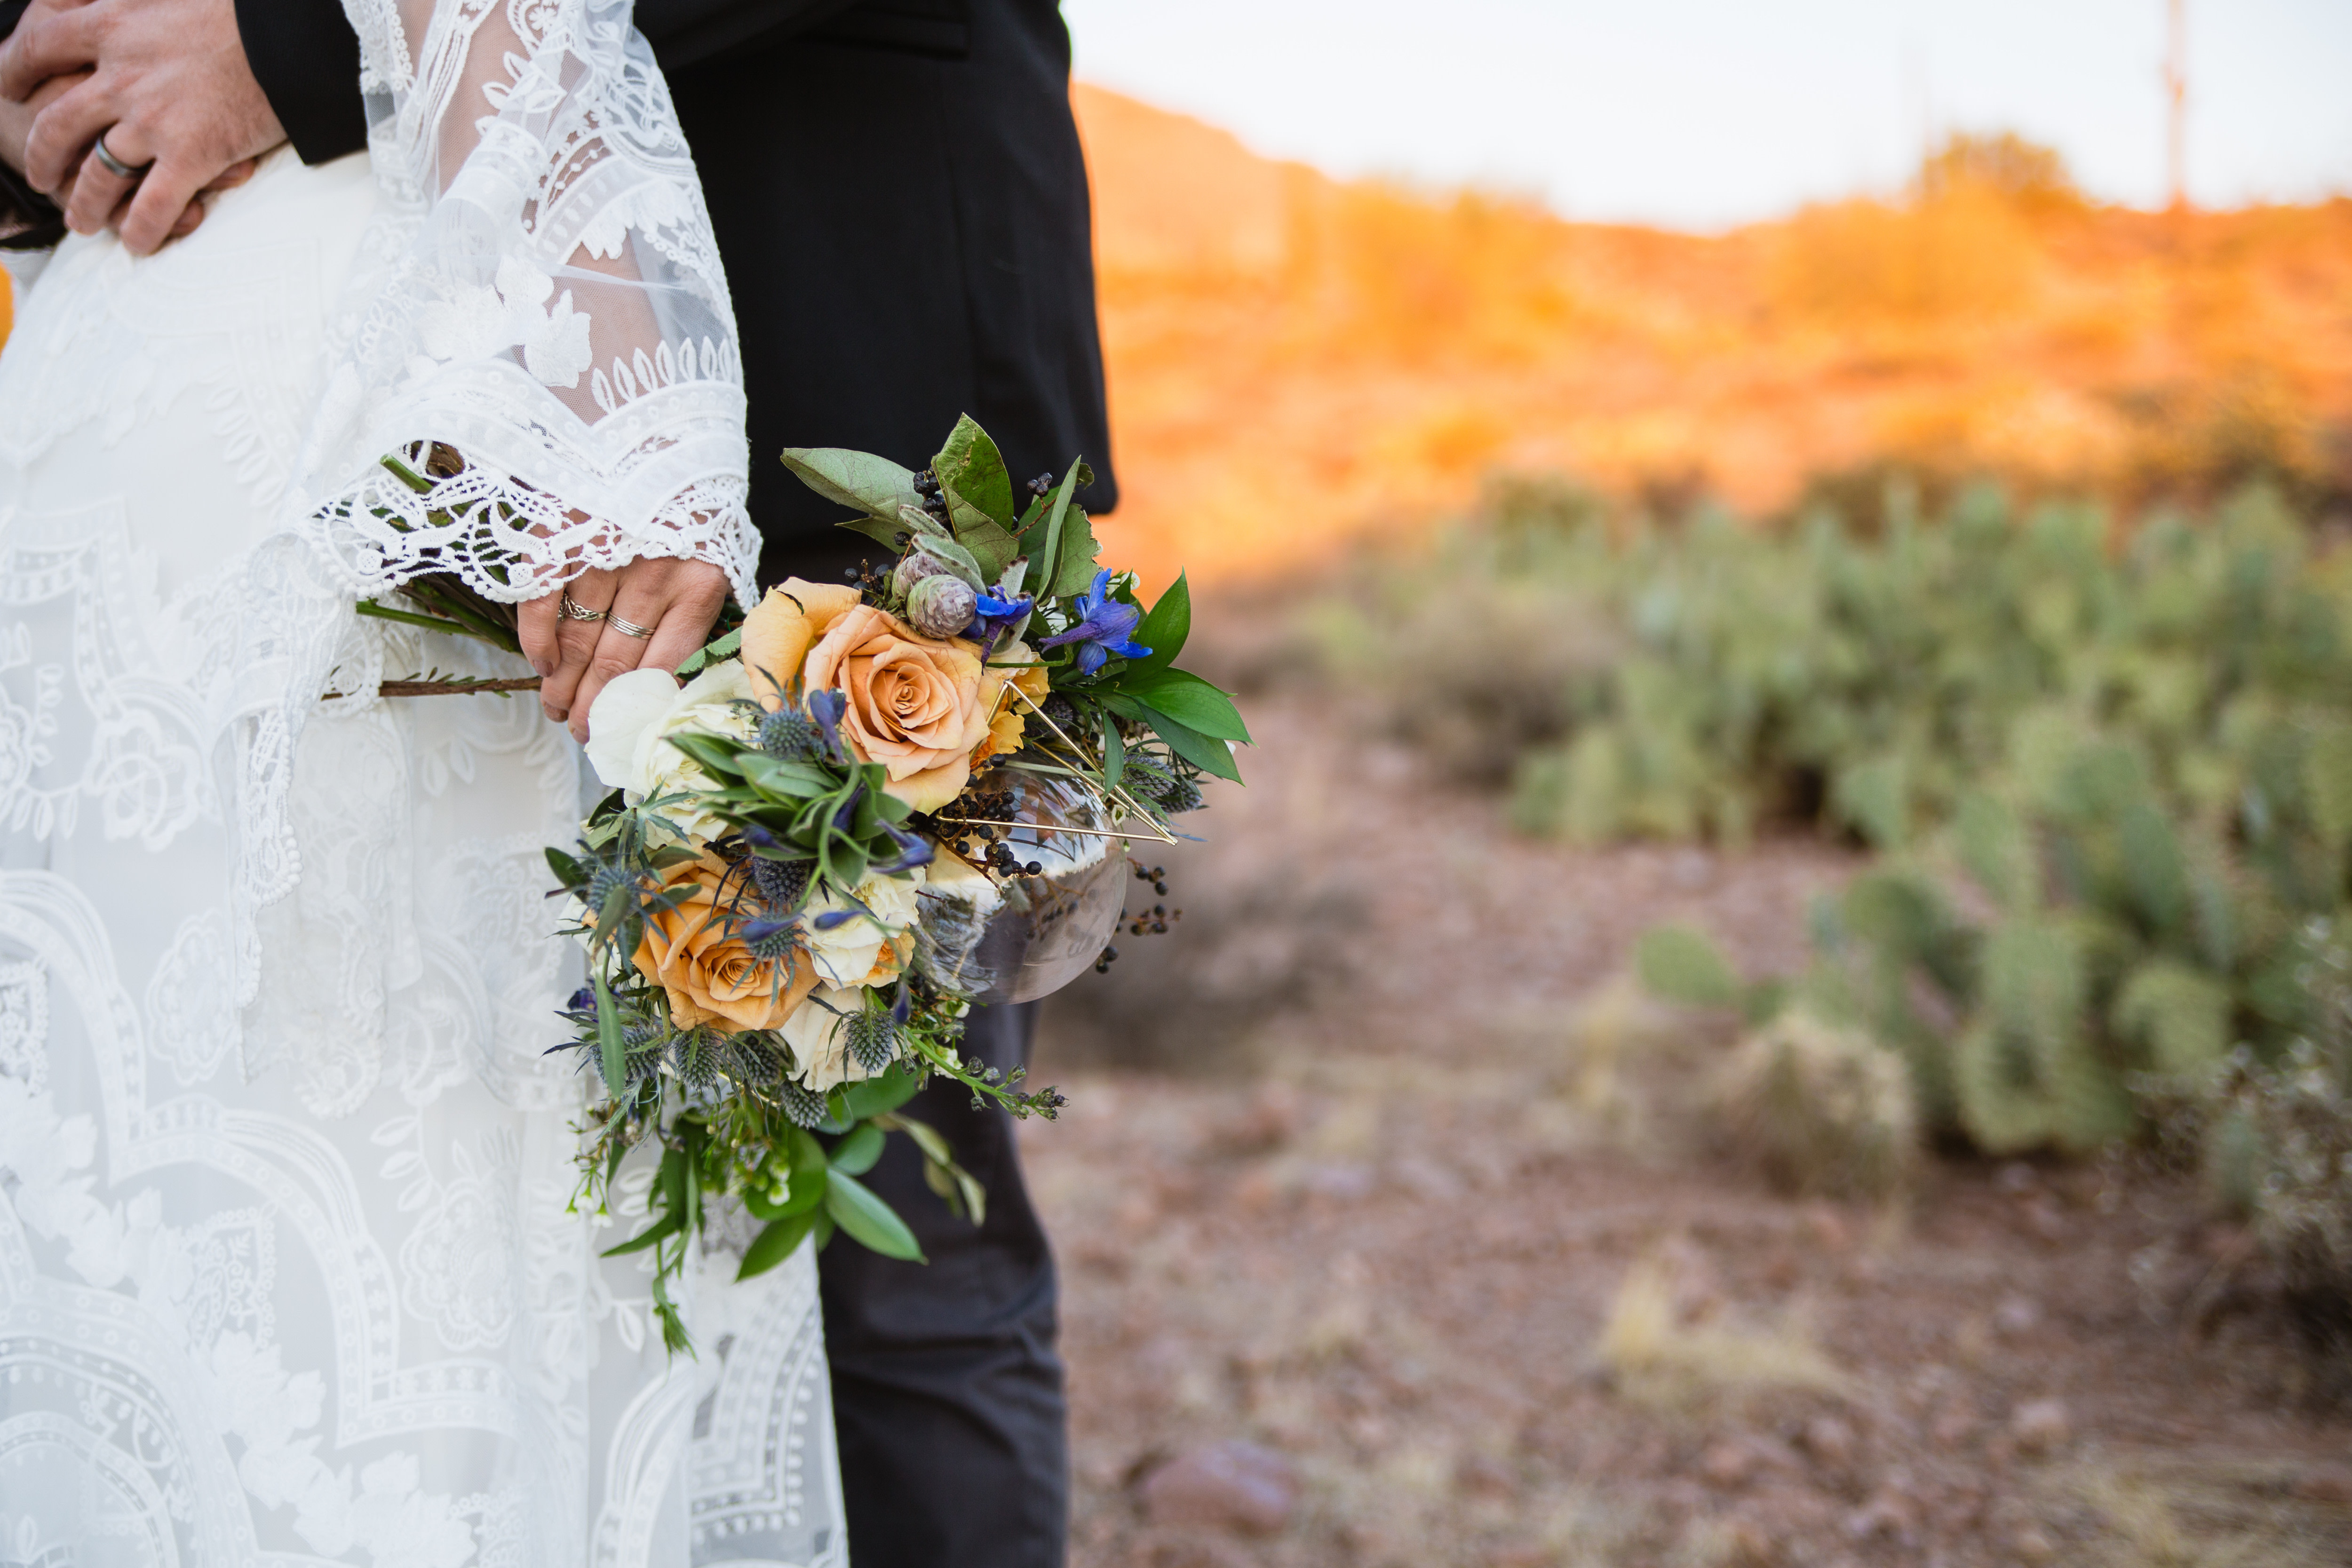 Wedding Bouquet from a Witchy Boho Styled Shoot in the Superstition Mountain